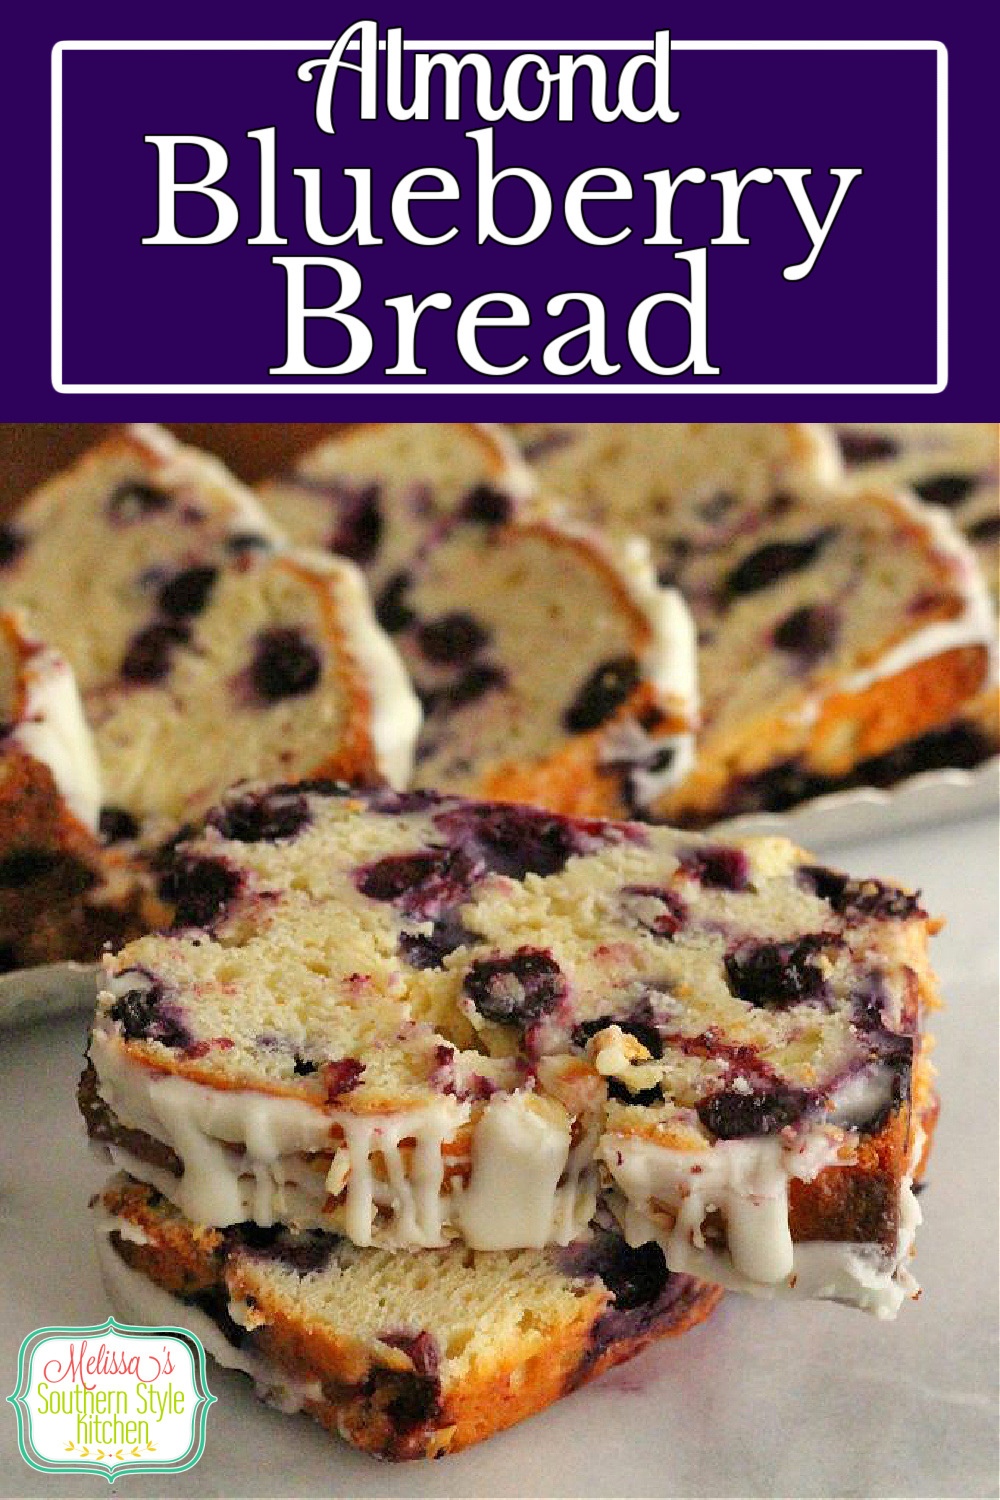 No yeast is required to make this irresistible Almond Blueberry Yogurt Bread #blueberrybread #greekyogurt #bread #sweetbreadrecipes #brunch #blueberries #breakfast #desserts #dessertfoodrecipes #holidaybrunch #southernfood #southernrecipes